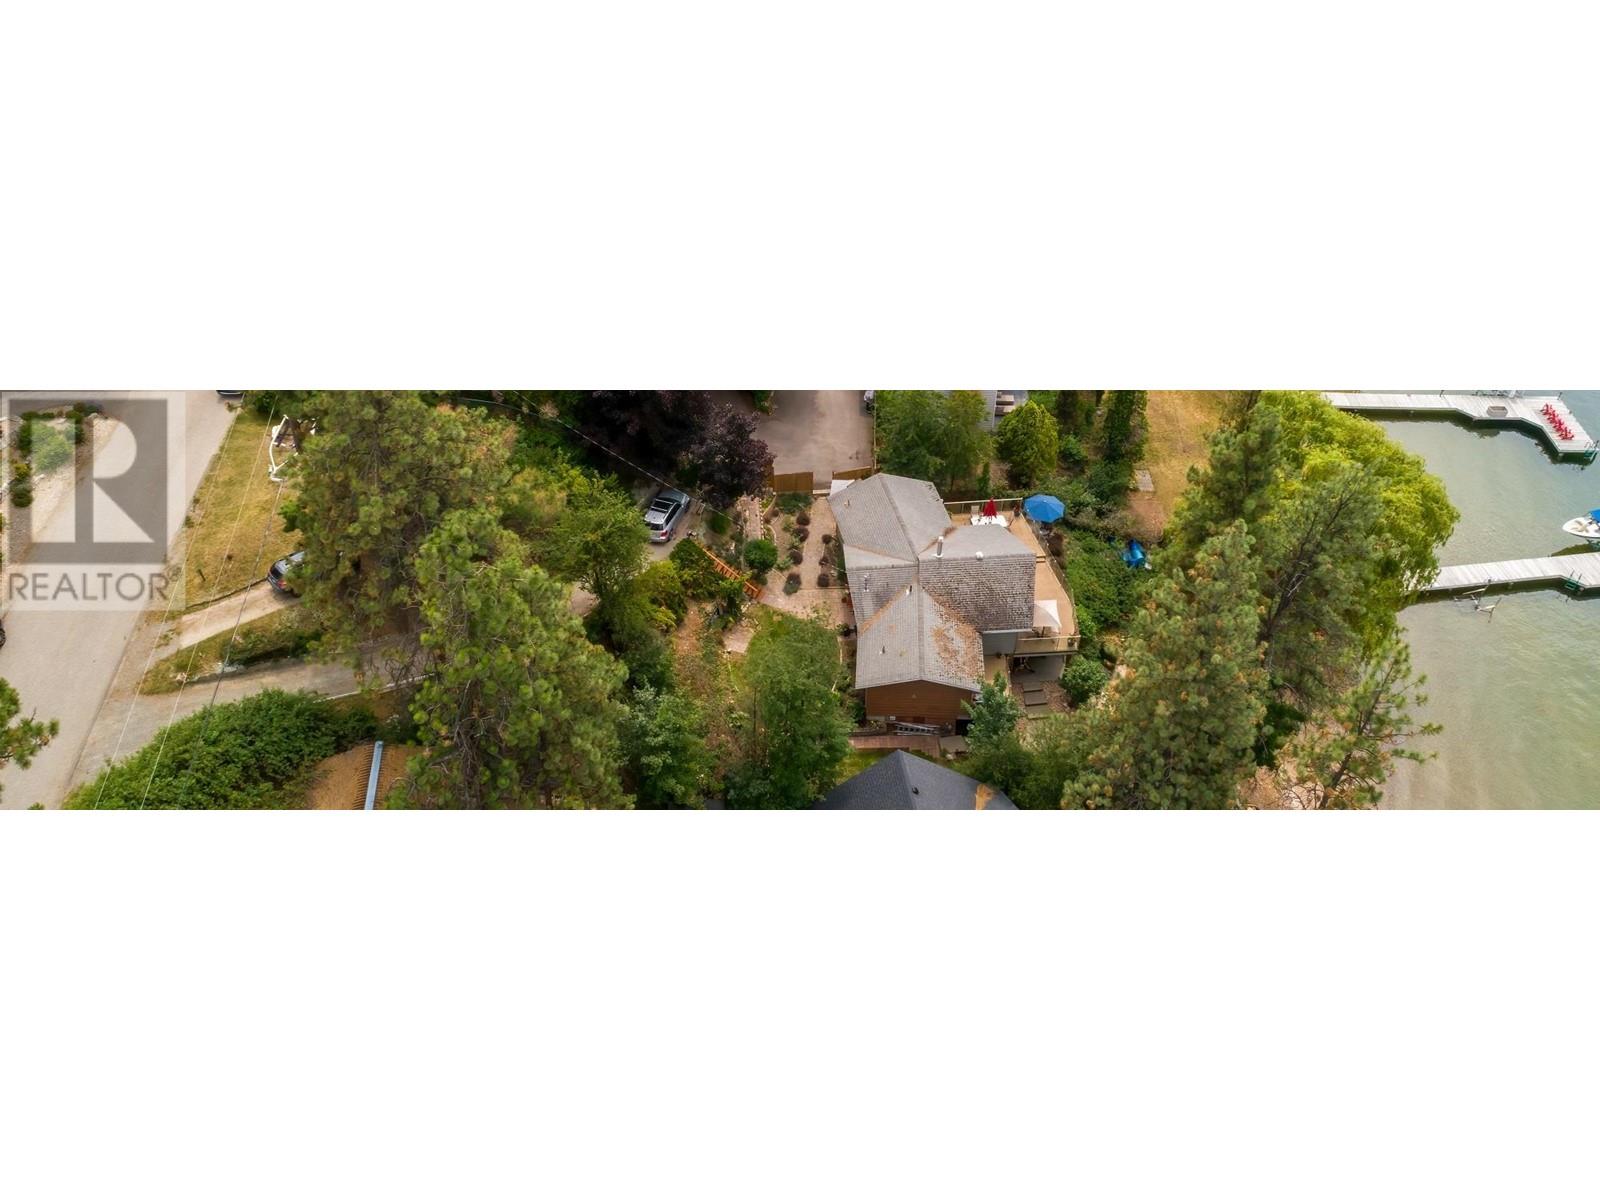  17130 Coral Beach Road, Lake Country